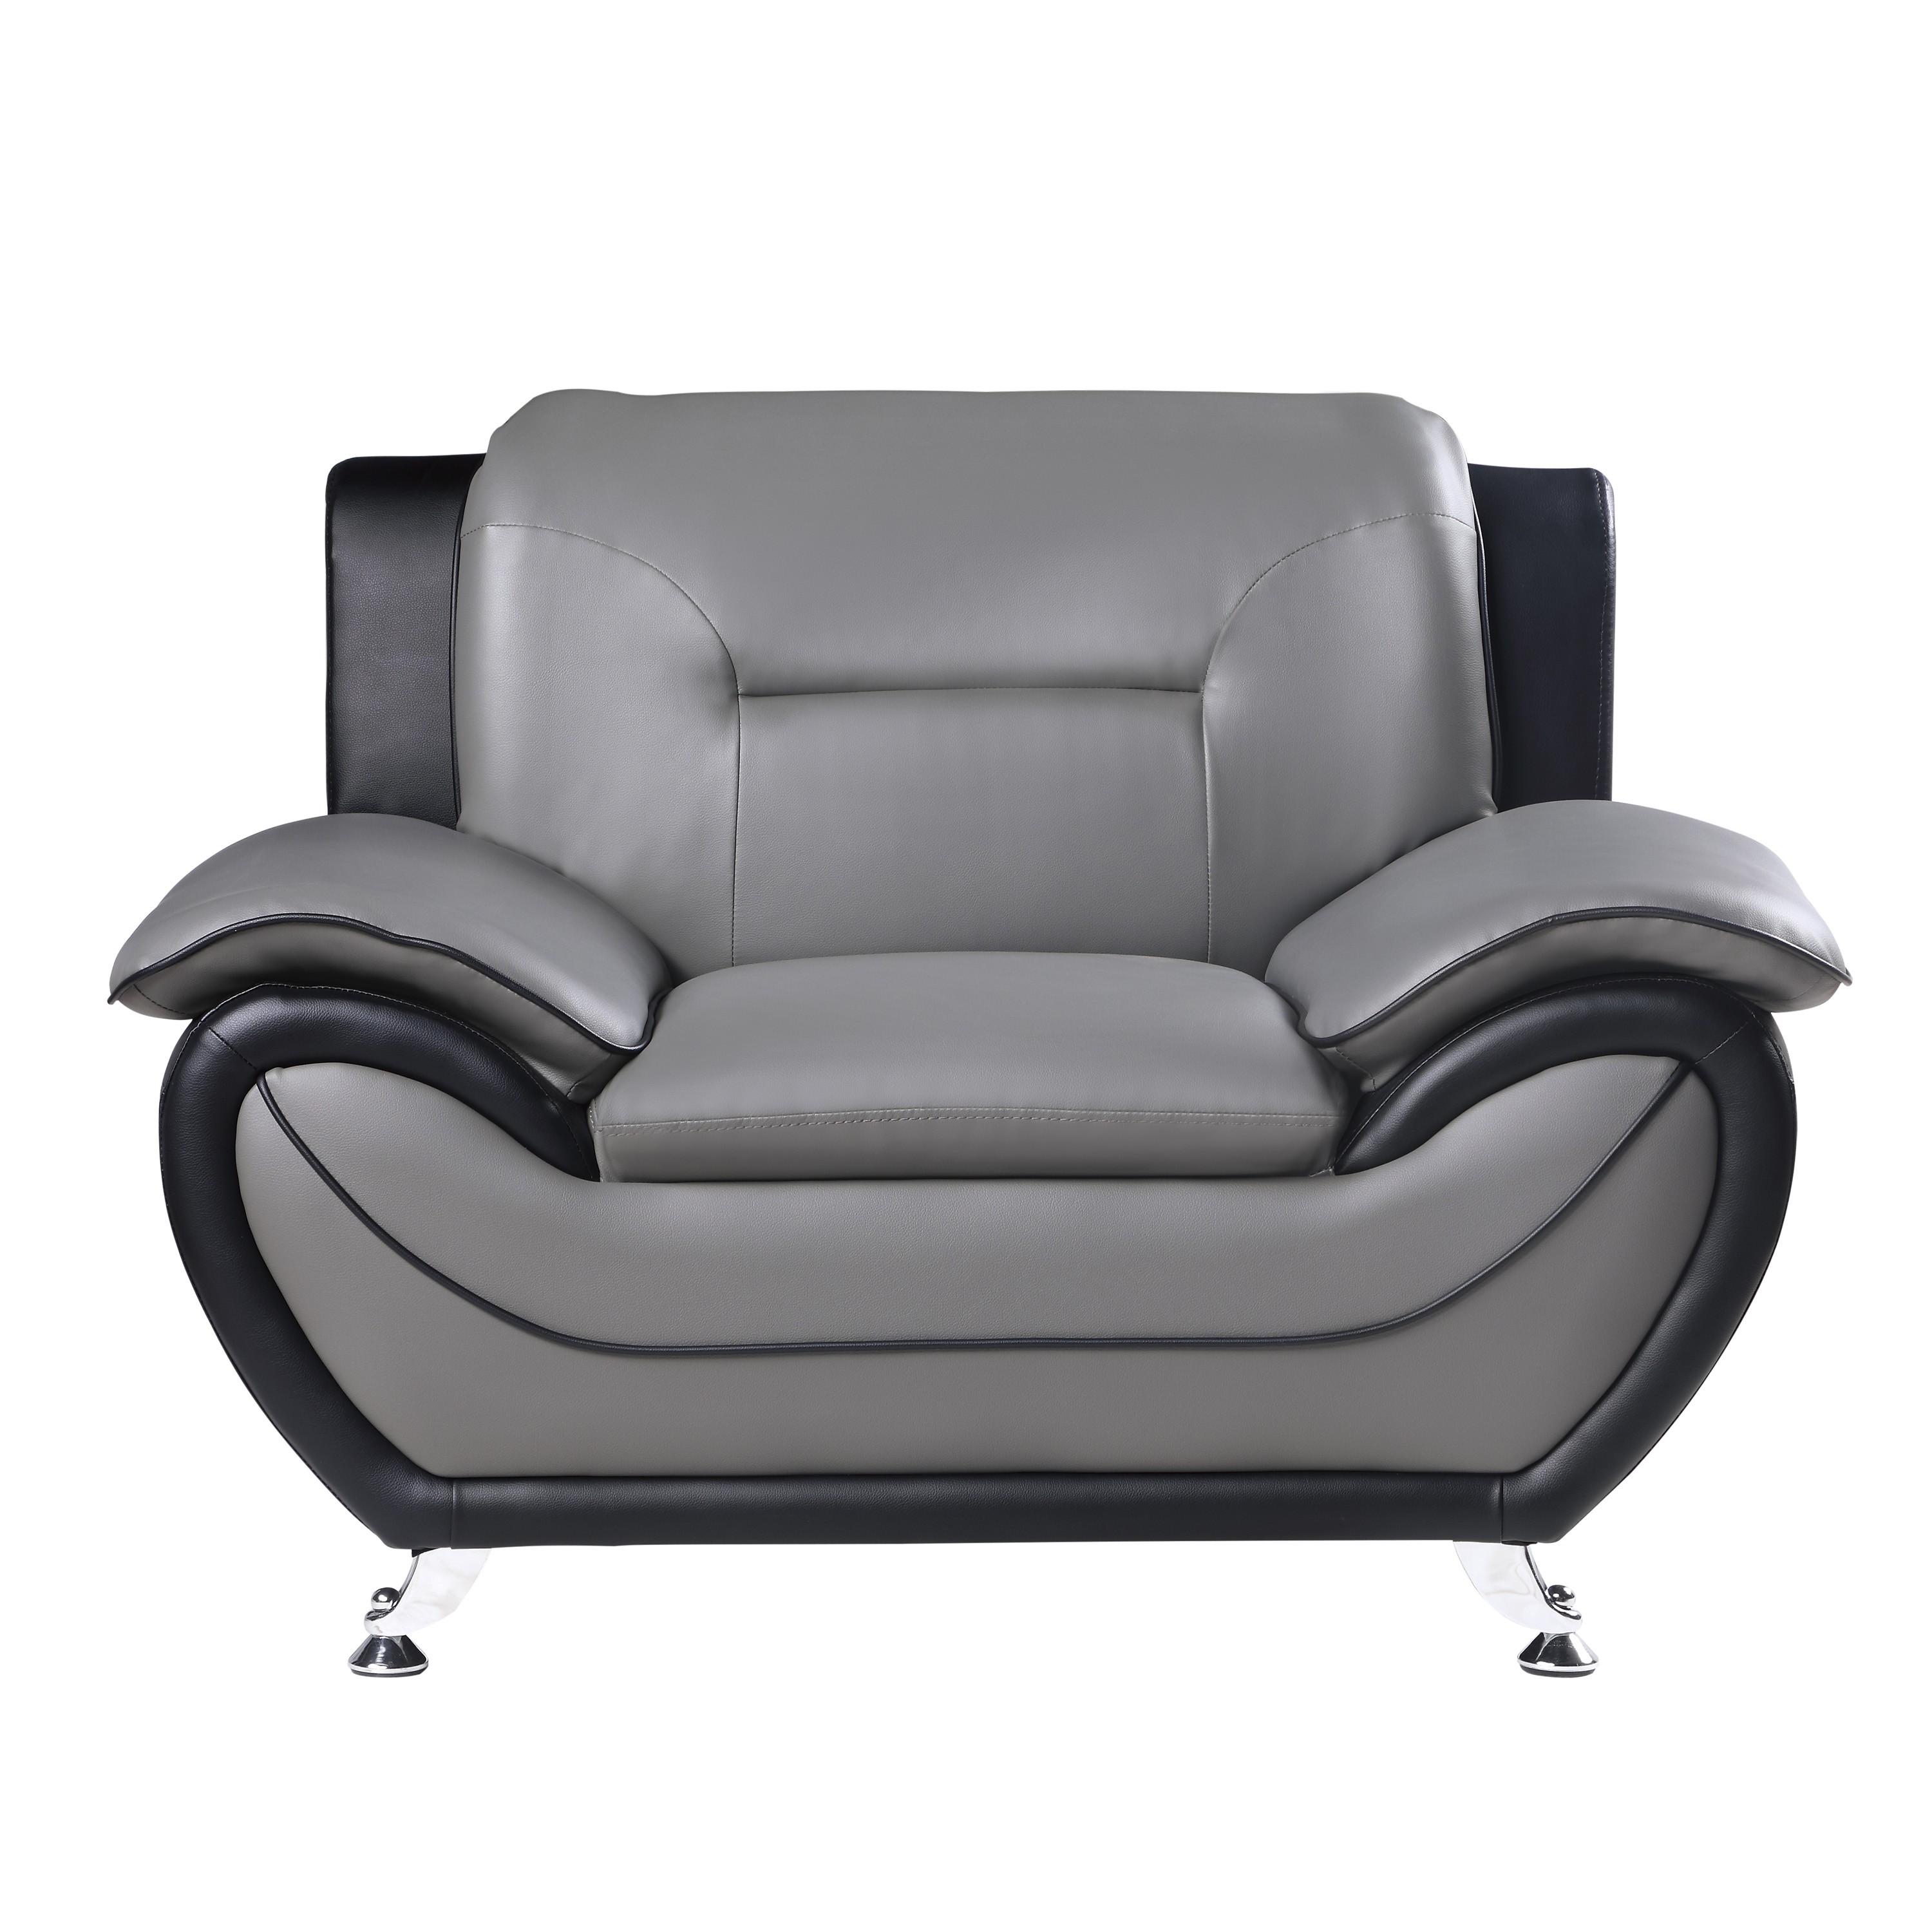 Contemporary Arm Chair 9419-1 Matteo 9419-1 in Gray Faux Leather